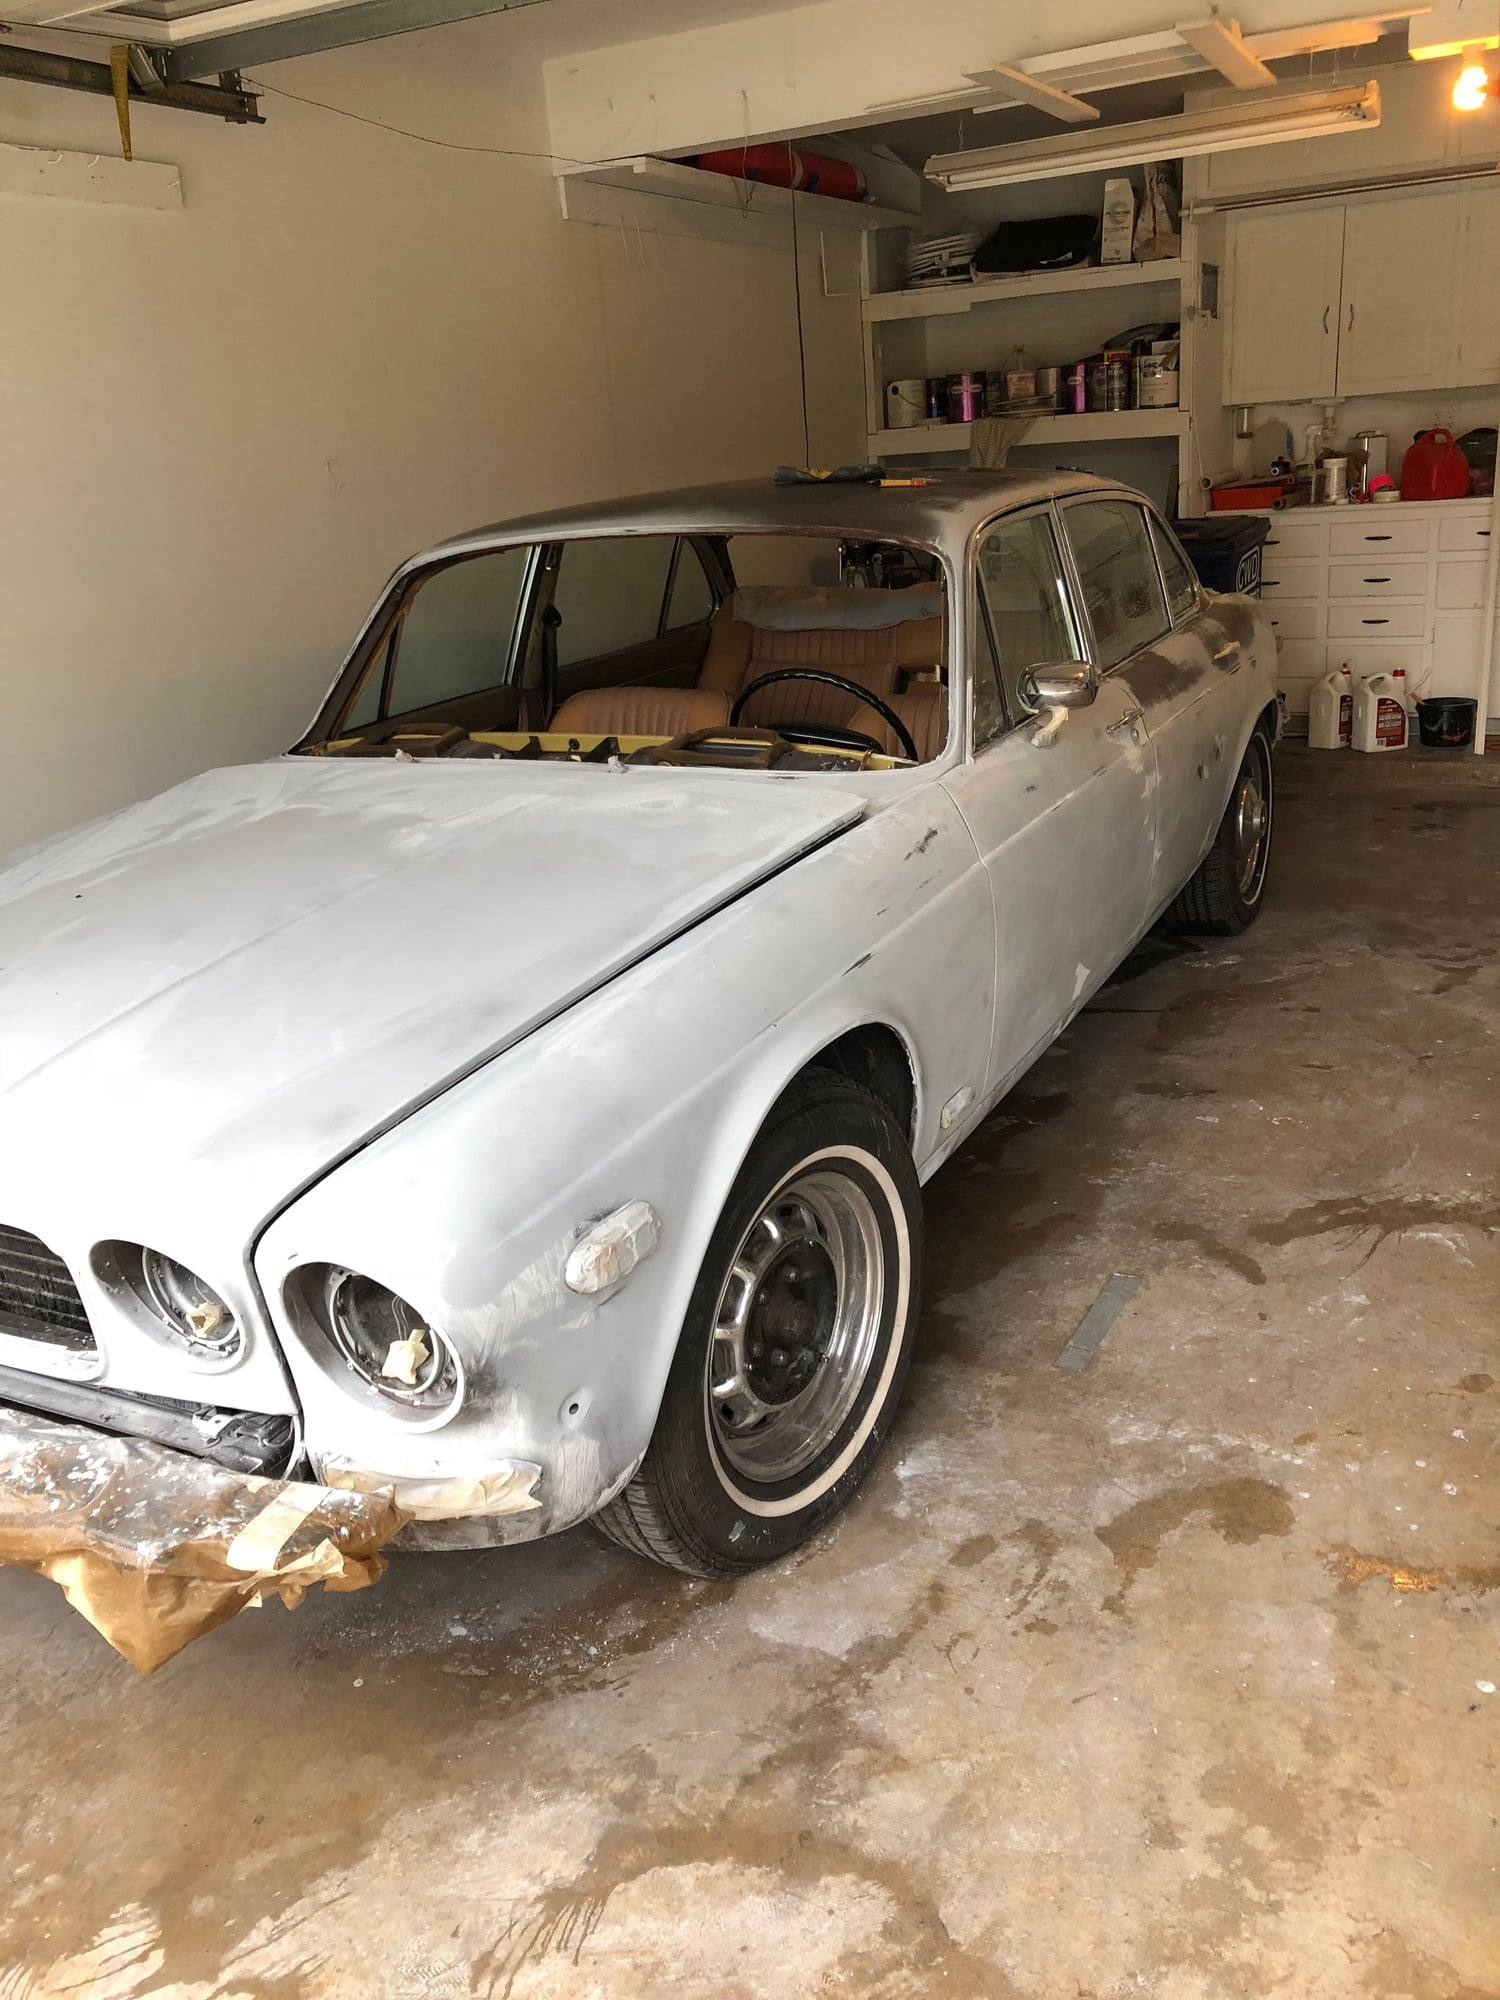 1974 Jaguar XJ12 - 1974 XJ12L Unfinished Running Project - Used - VIN UE2R5068400000000 - 77,800 Miles - 12 cyl - 2WD - Automatic - Sedan - Brown - Euless, TX 76040, United States